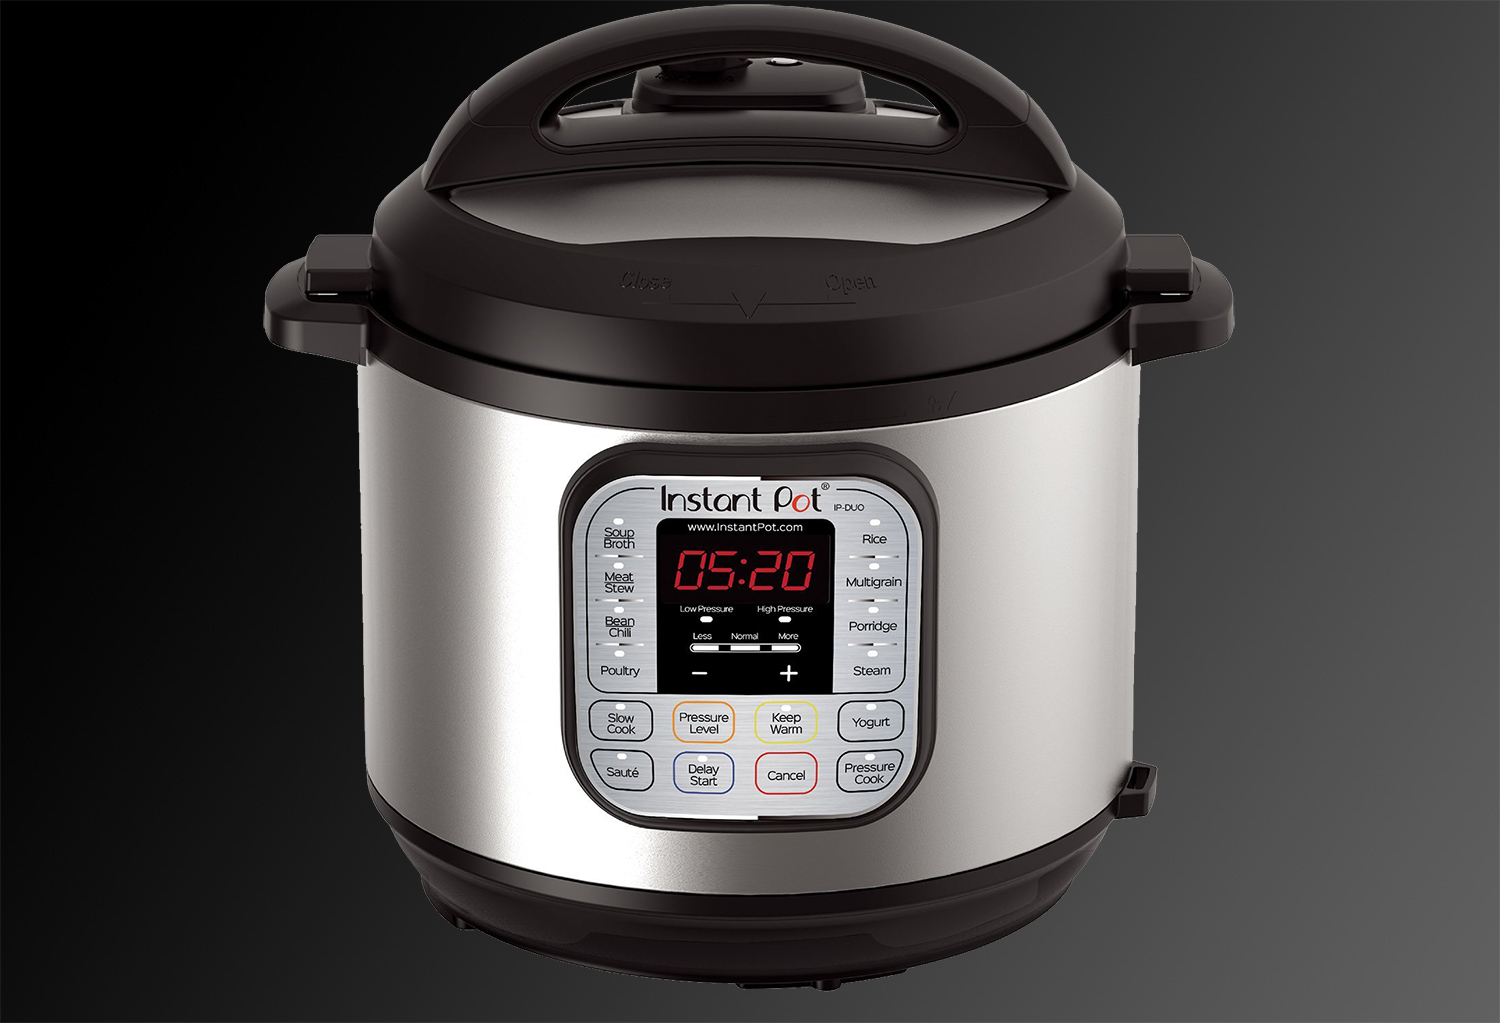 B00FLYWNYQ Instant Pot DUO60 6 Qt 7-in-1 Multi-Use Programmable